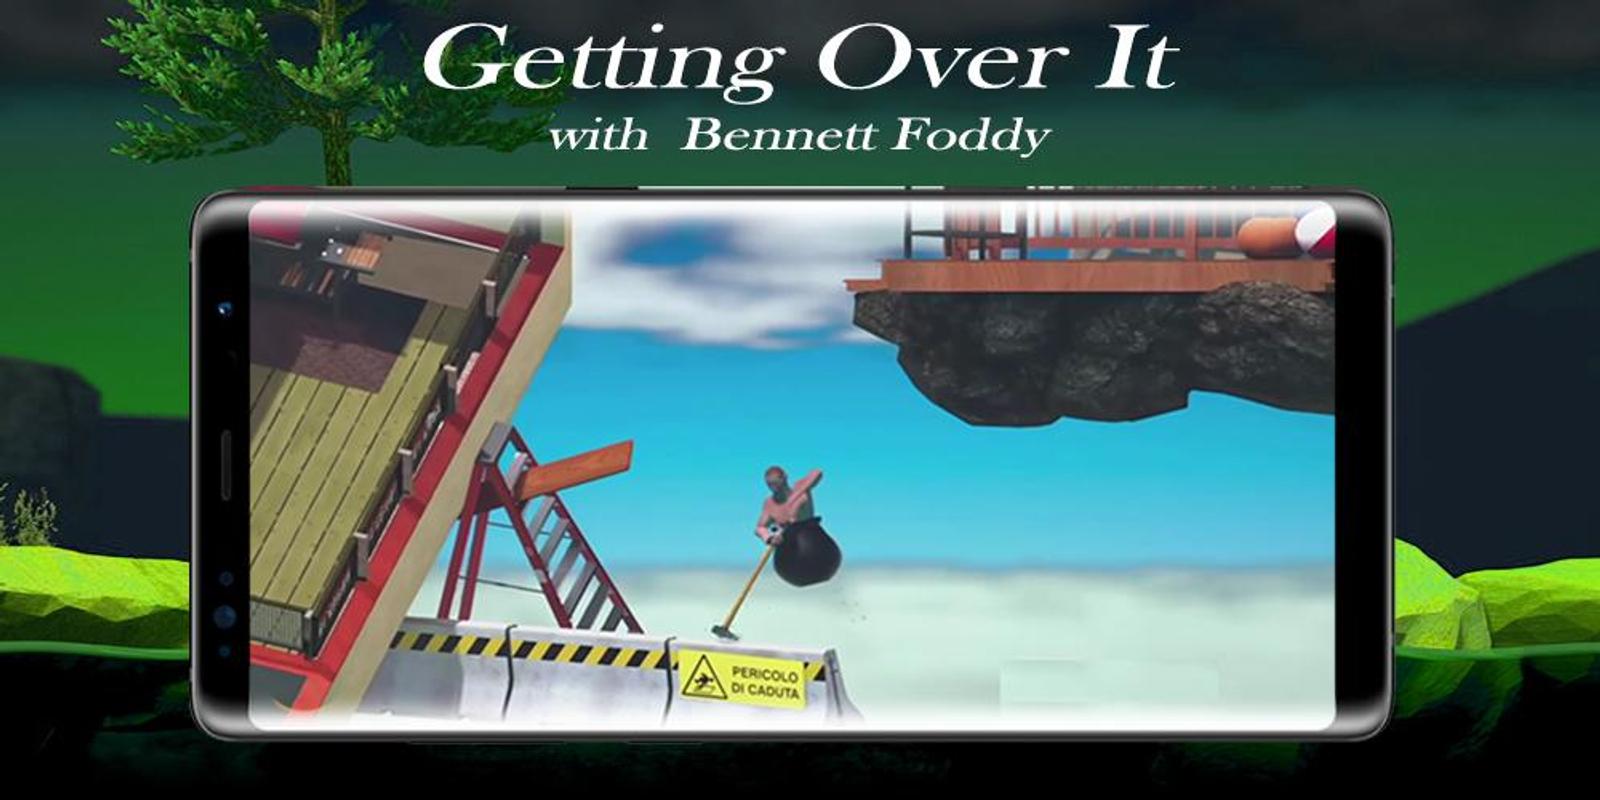 Game get help. Карта геттинг овер ИТ. Getting over it with Bennett Foddy вся карта. Getting over it with Bennett карта. Getting over it карта полностью.